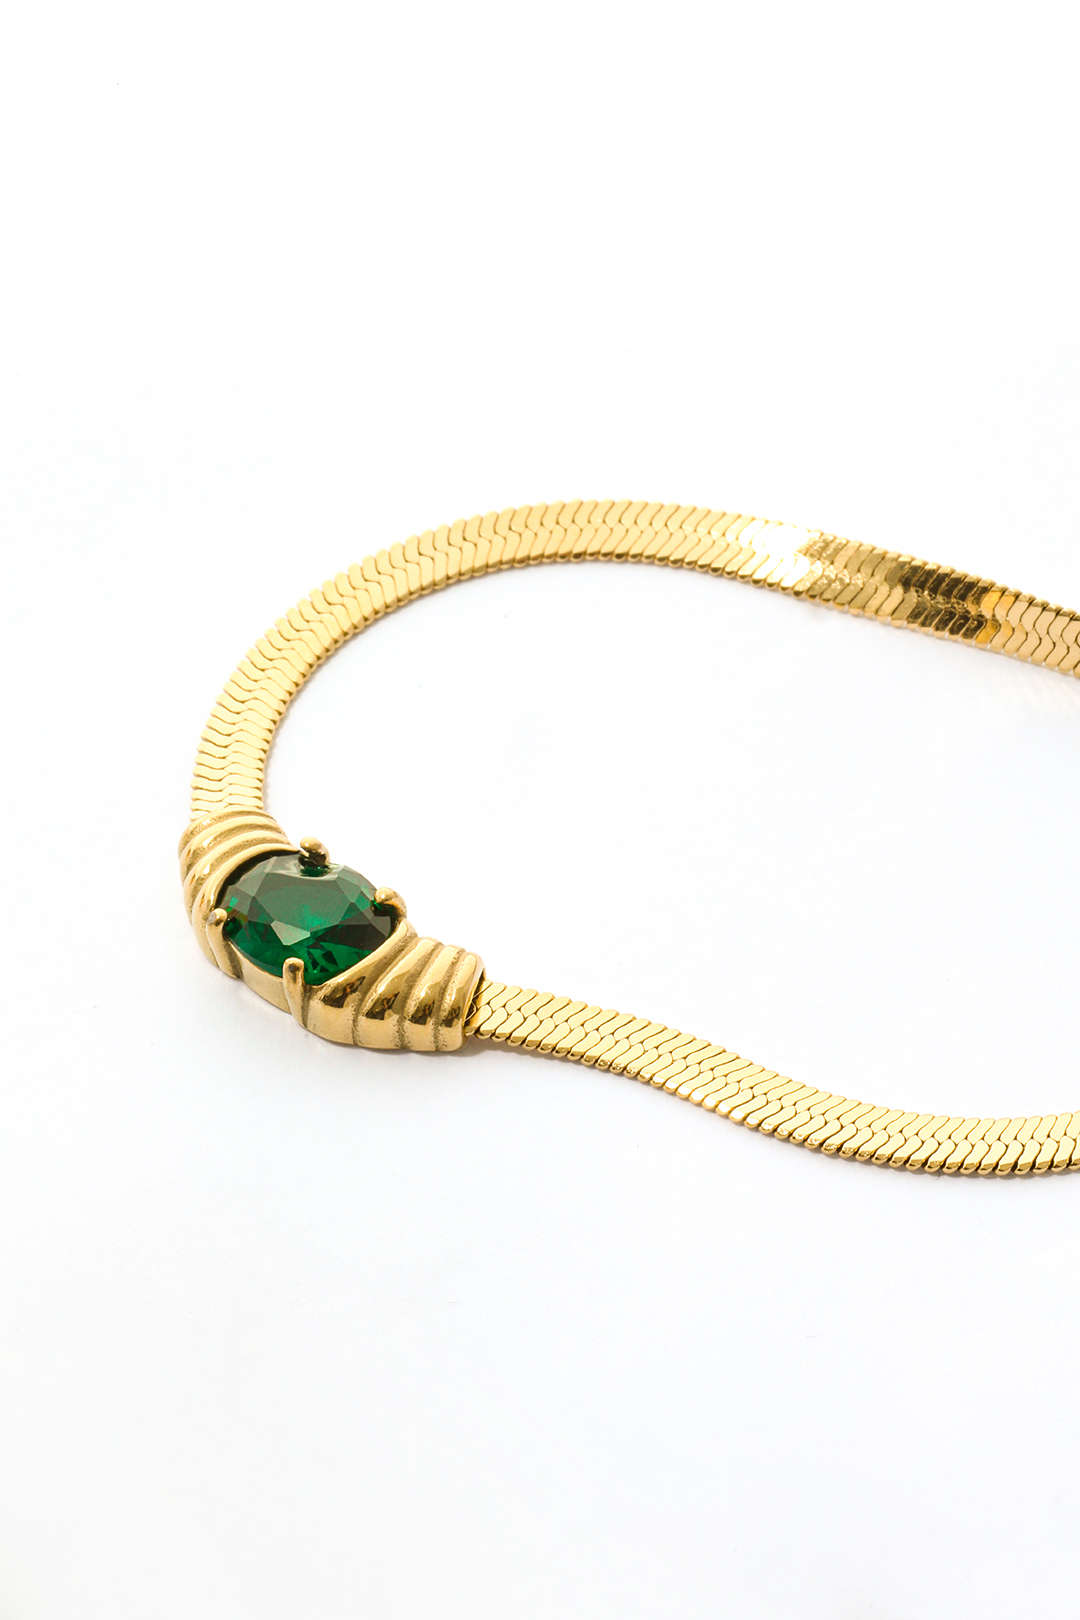 Emerald Snake Chain Necklace